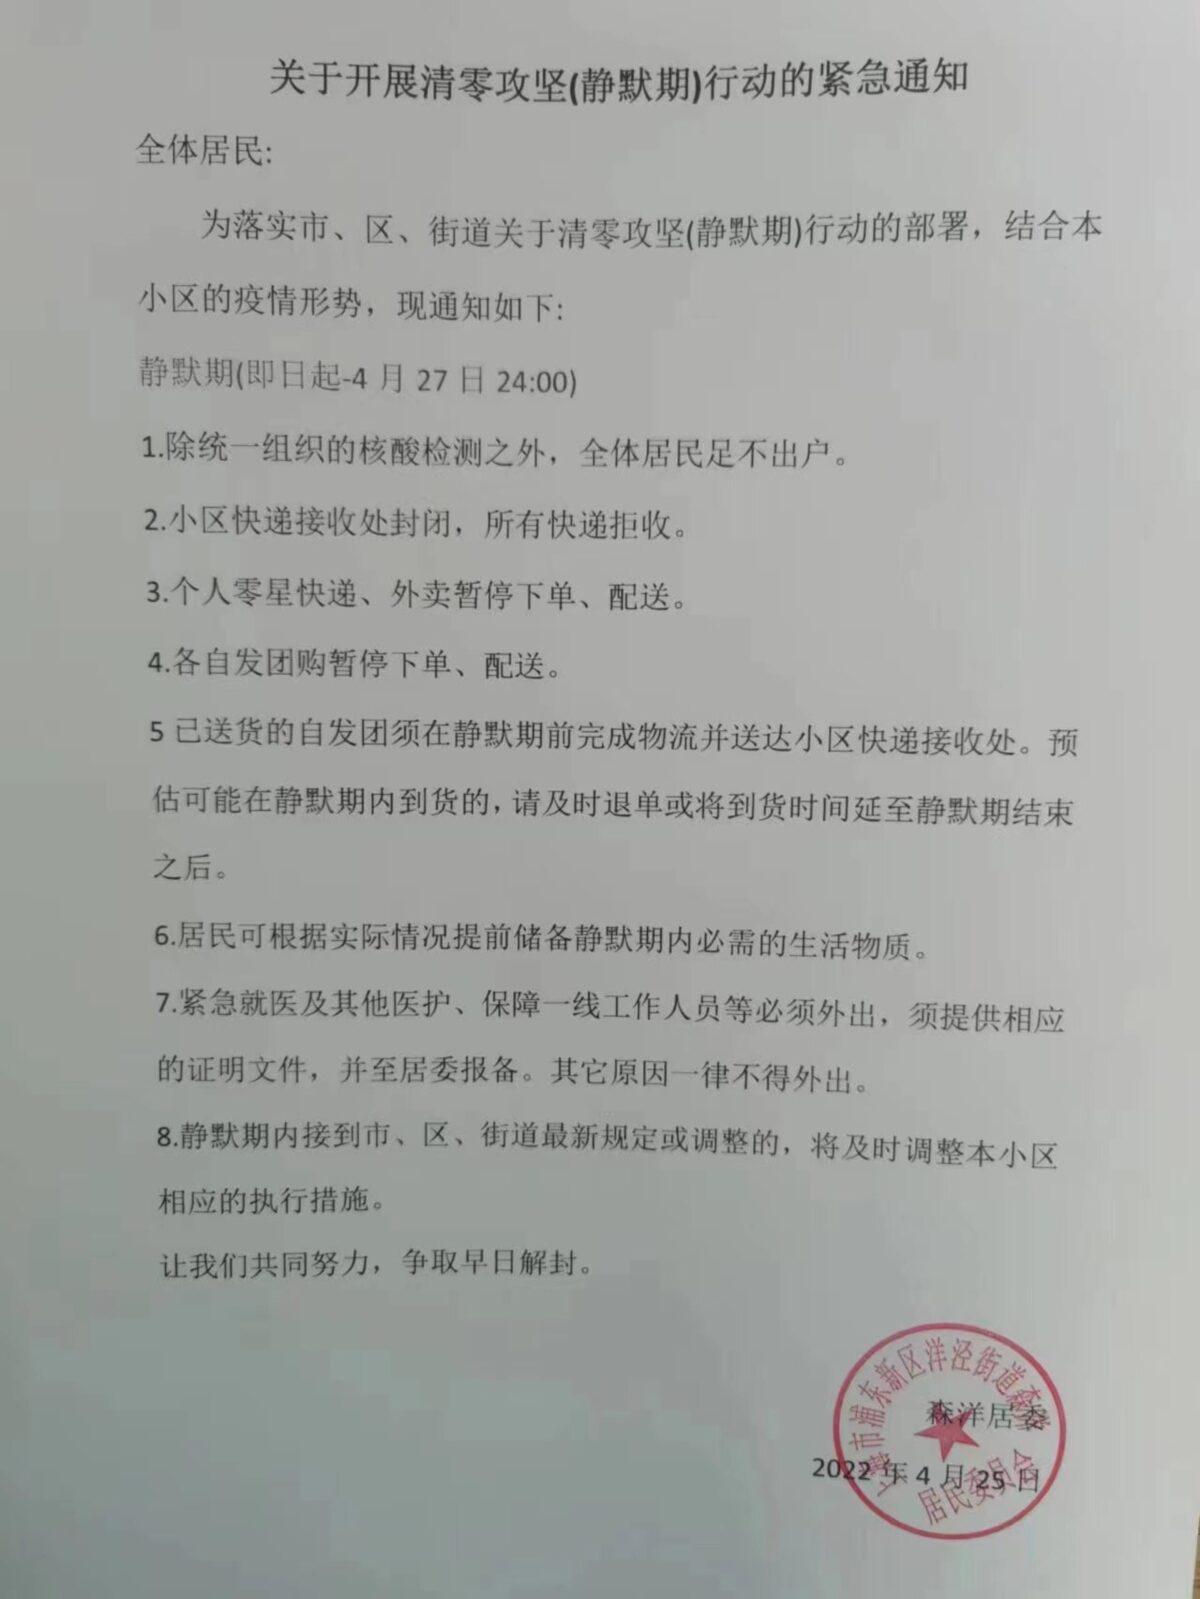 A notice was seen in a residential building in Yangjing St., Pudong district, Shanghai, on April 25, 2022, indicating new lockdown restrictions. (Courtesy of Ms. Xu)